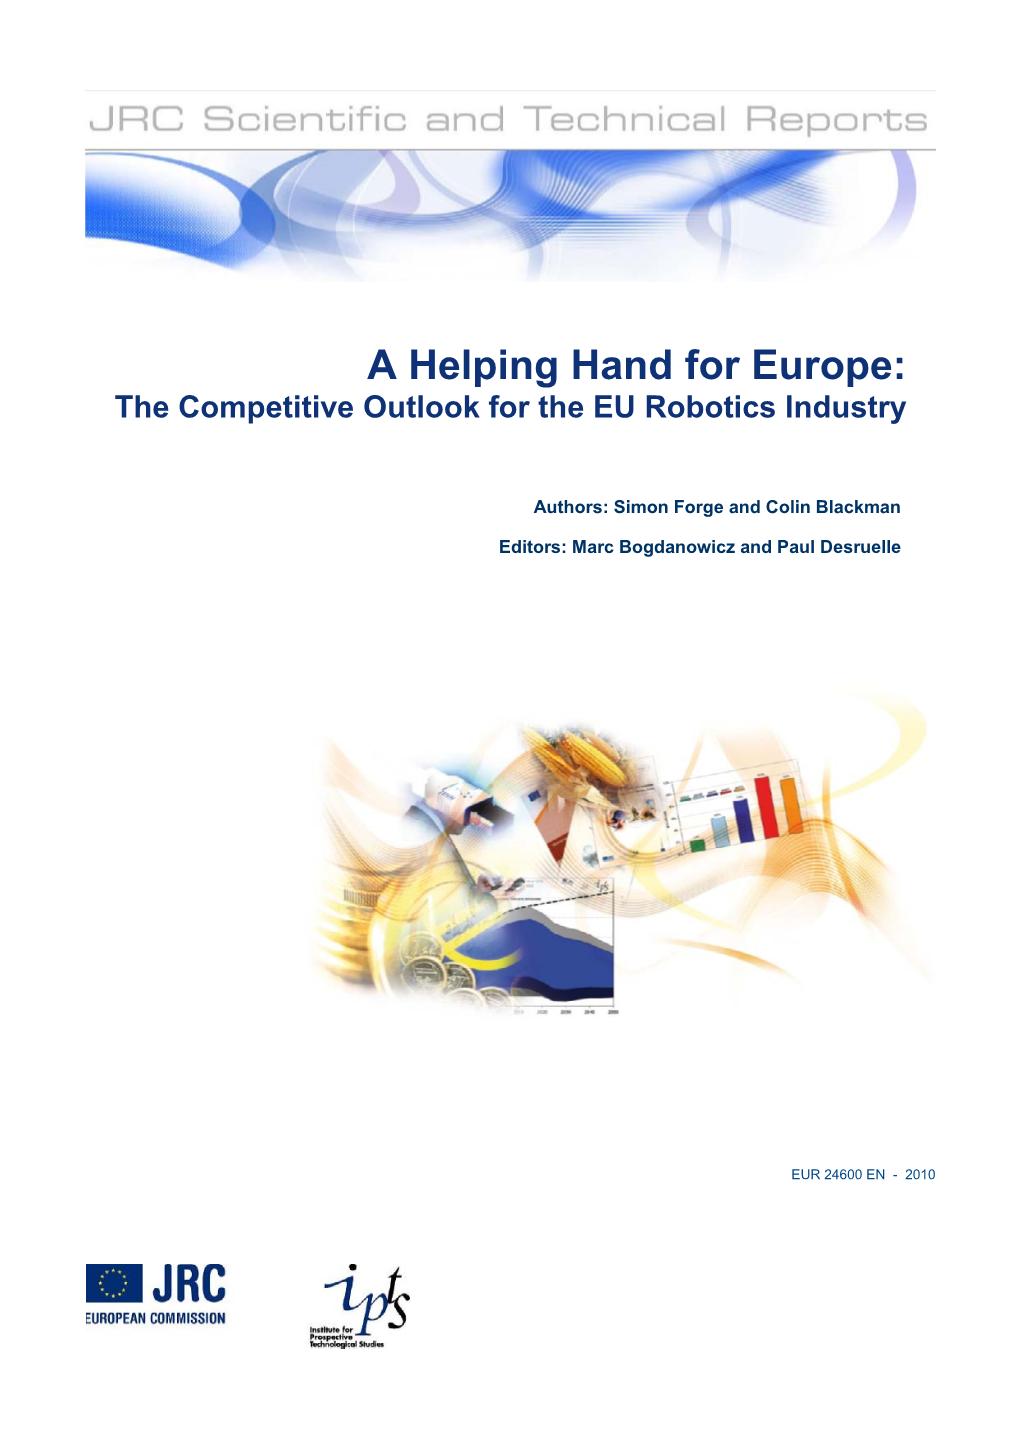 The Competitive Outlook for the EU Robotics Industry